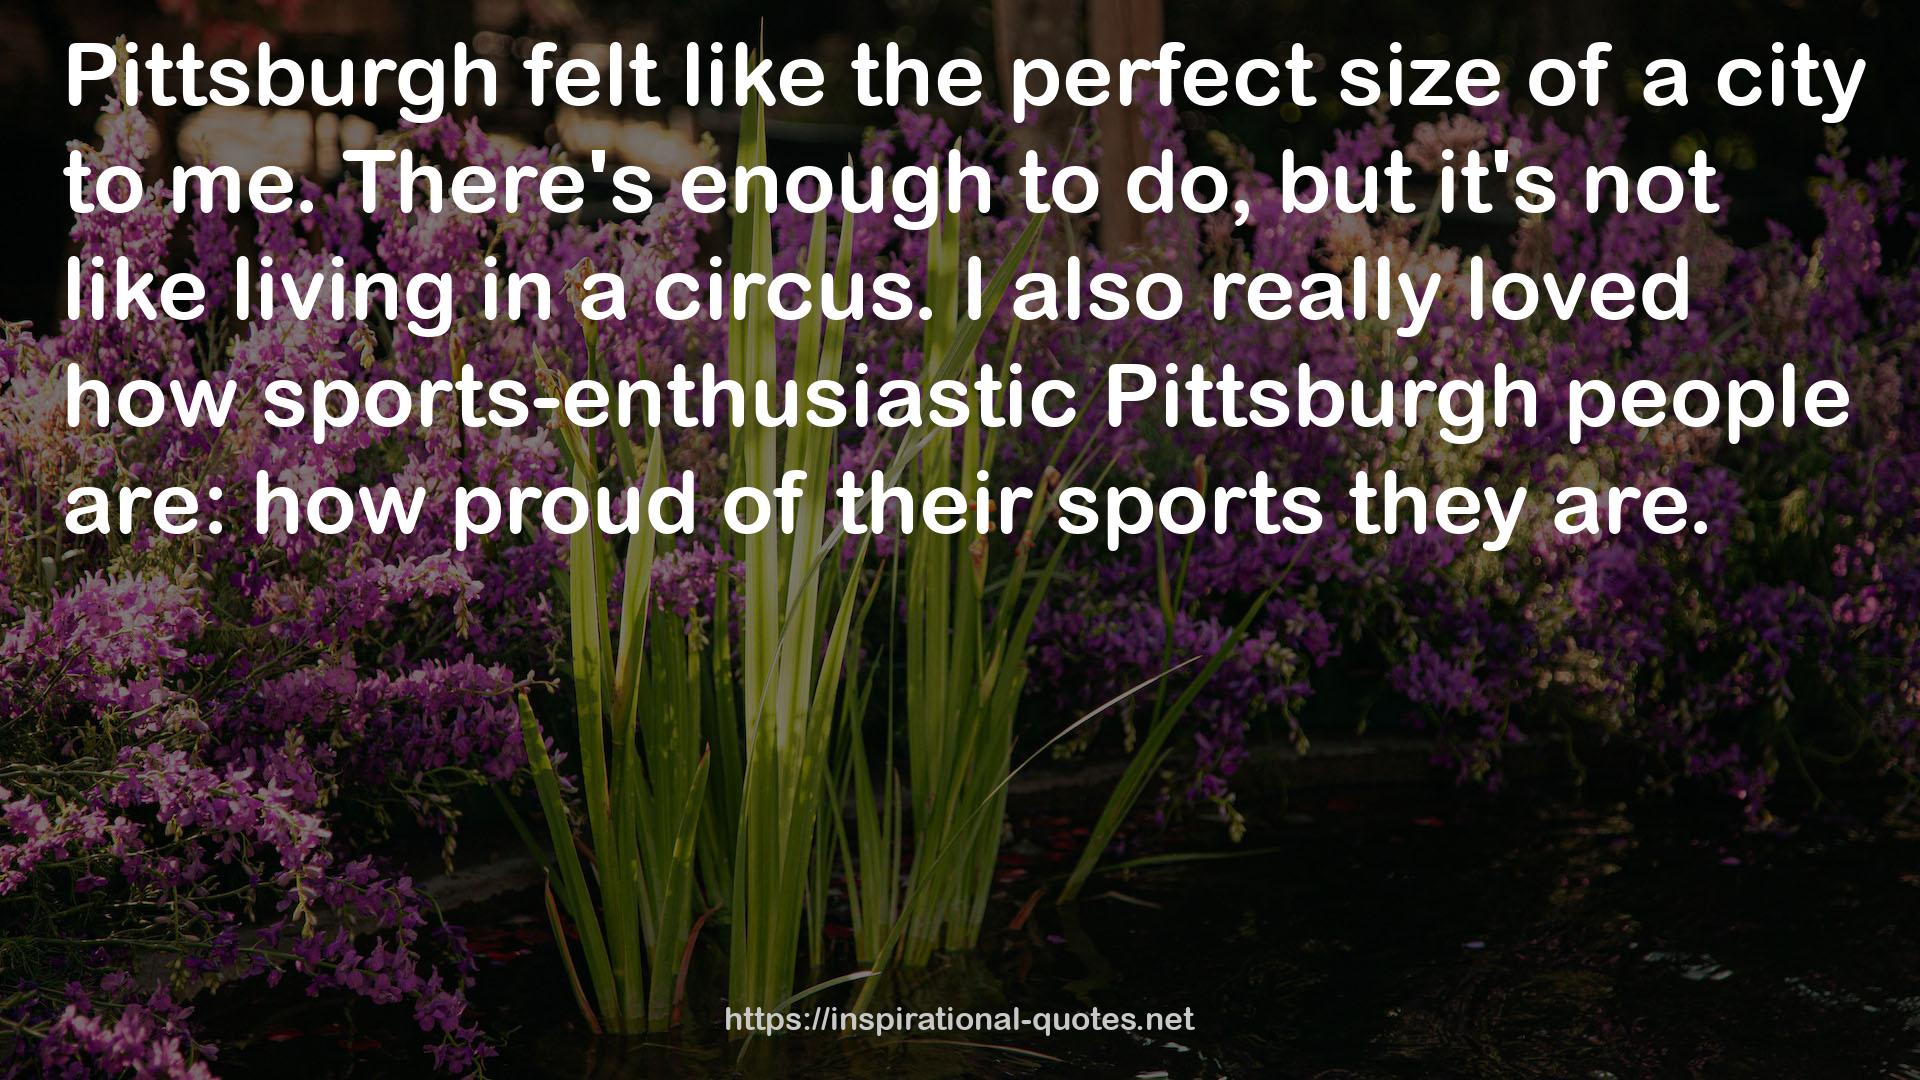 sports-enthusiastic Pittsburgh people  QUOTES